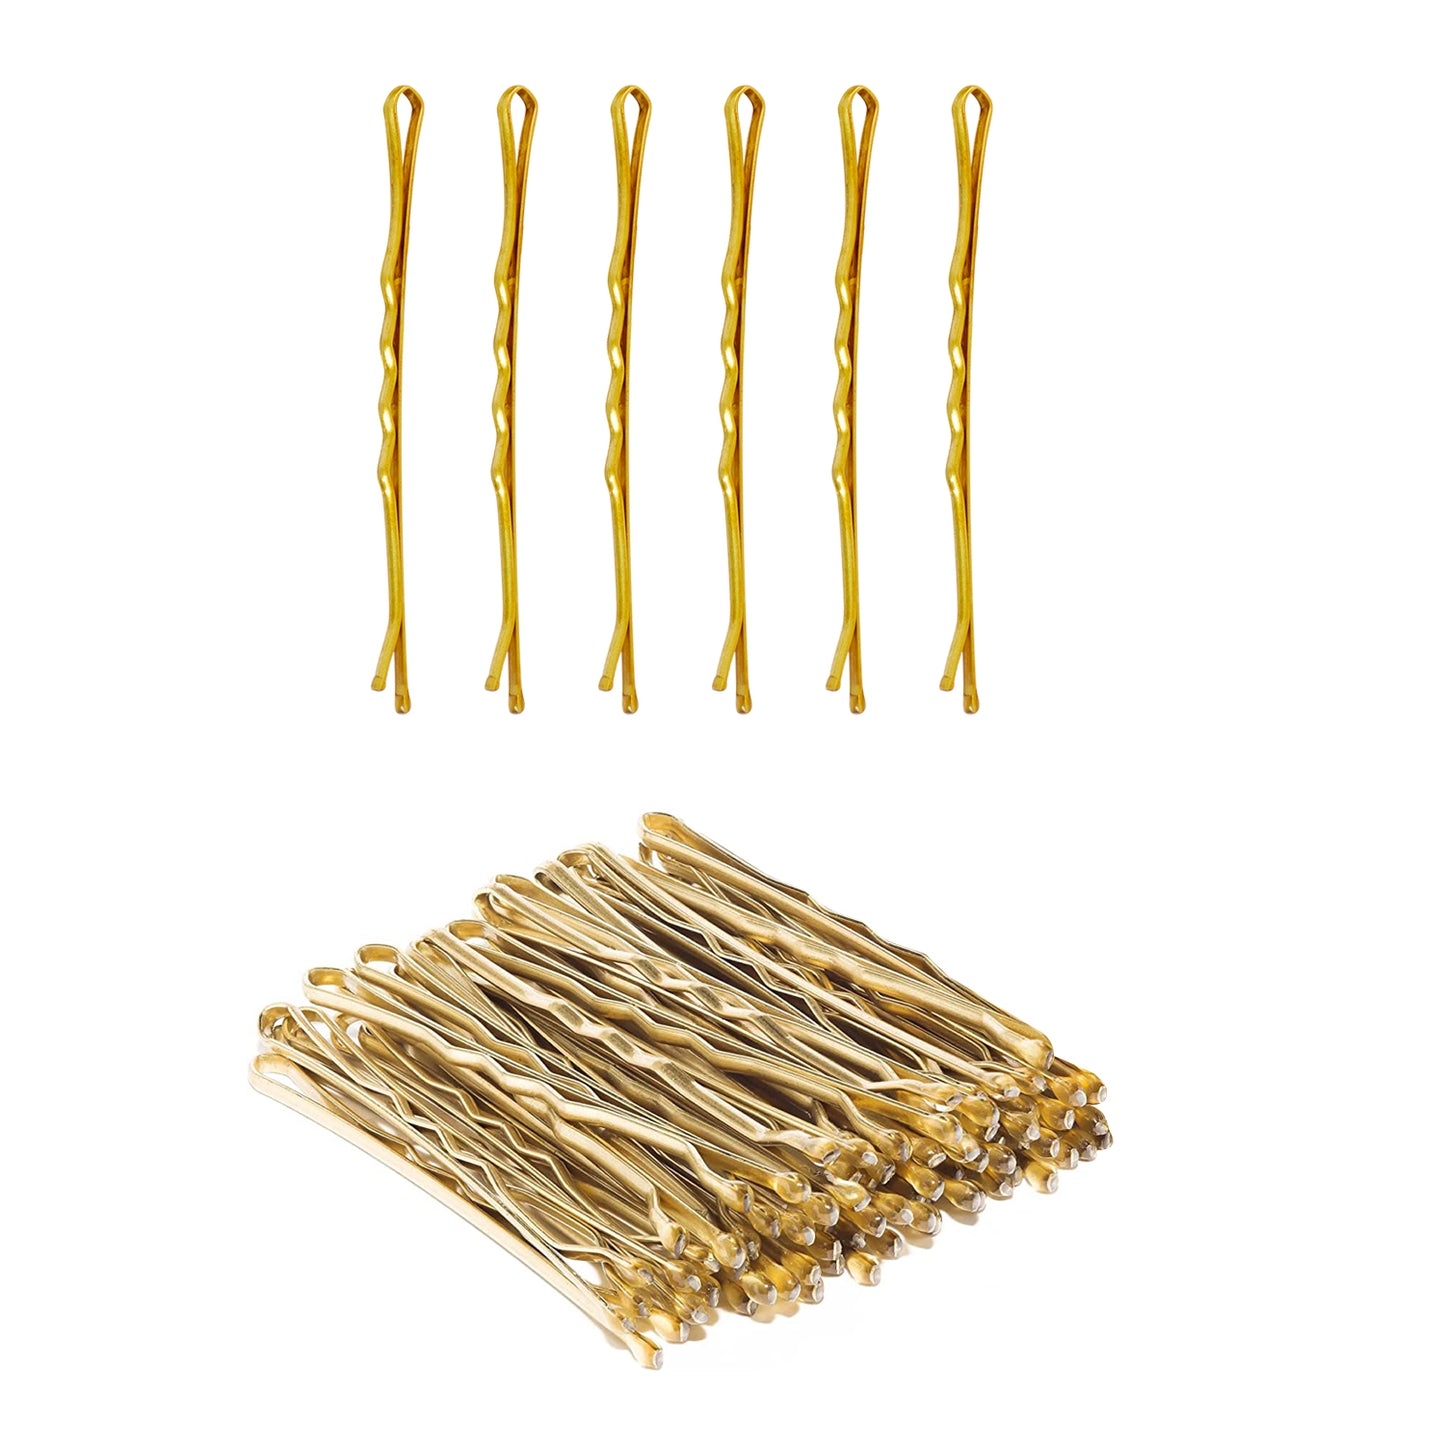 Secure your hair with our Blonde Bobby Pins. This pack of 60 non-twist, rust-resistant, ball-tipped hairpins is coated for extra comfort. Available in blonde, they are perfect for everyday use and professional styling, ensuring a secure hold and lasting durability.